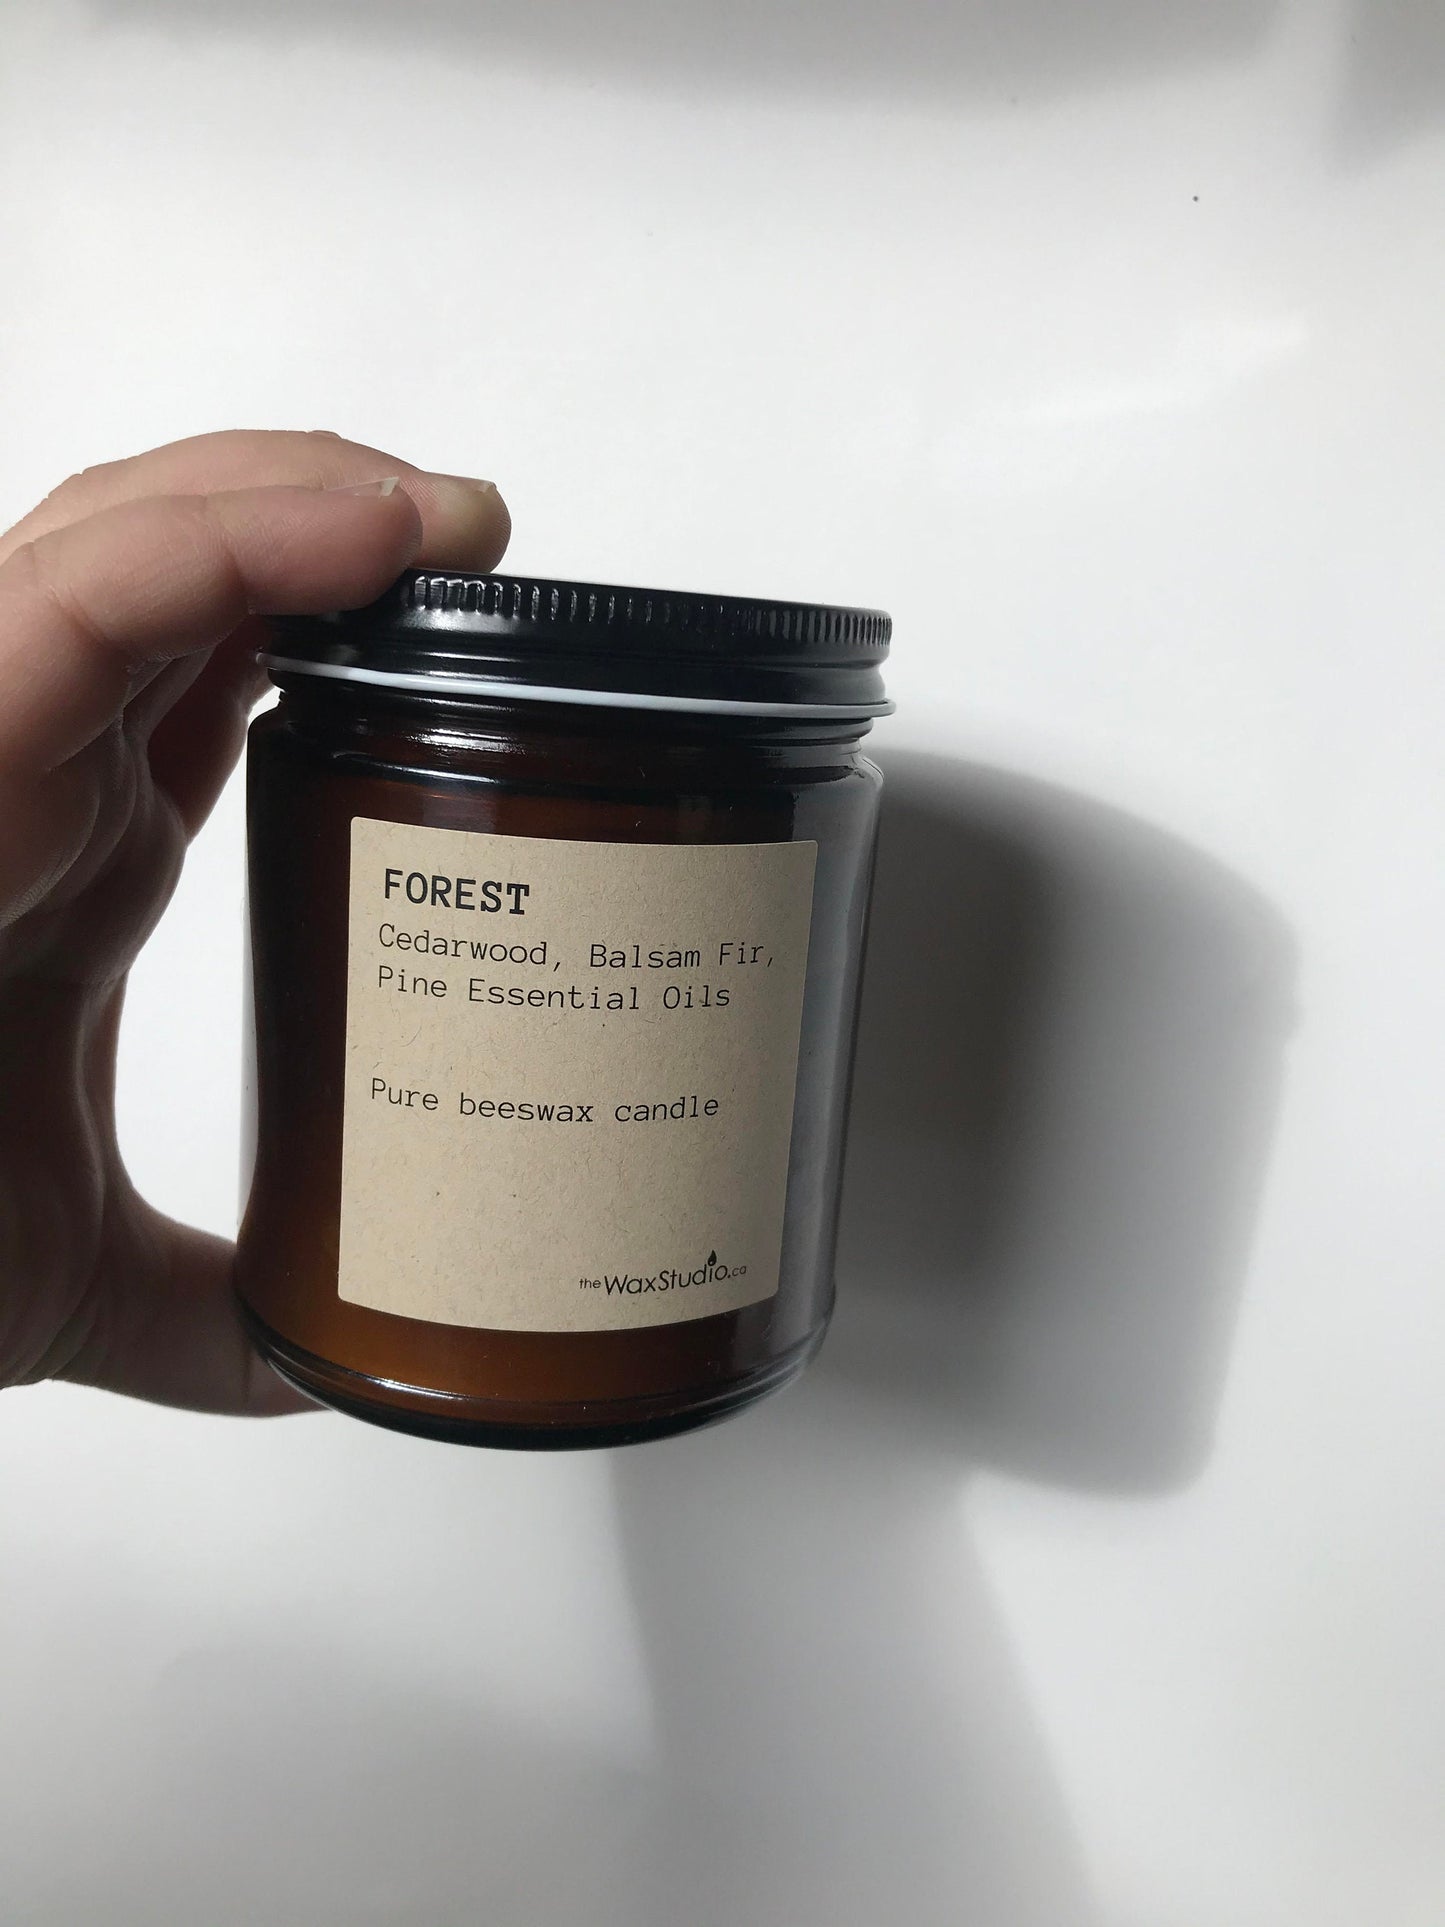 Forest - Beeswax Jar Candle // Woodland Aroma - Beeswax Candle - Amber Glass Jar Candle - 50 hour burn time